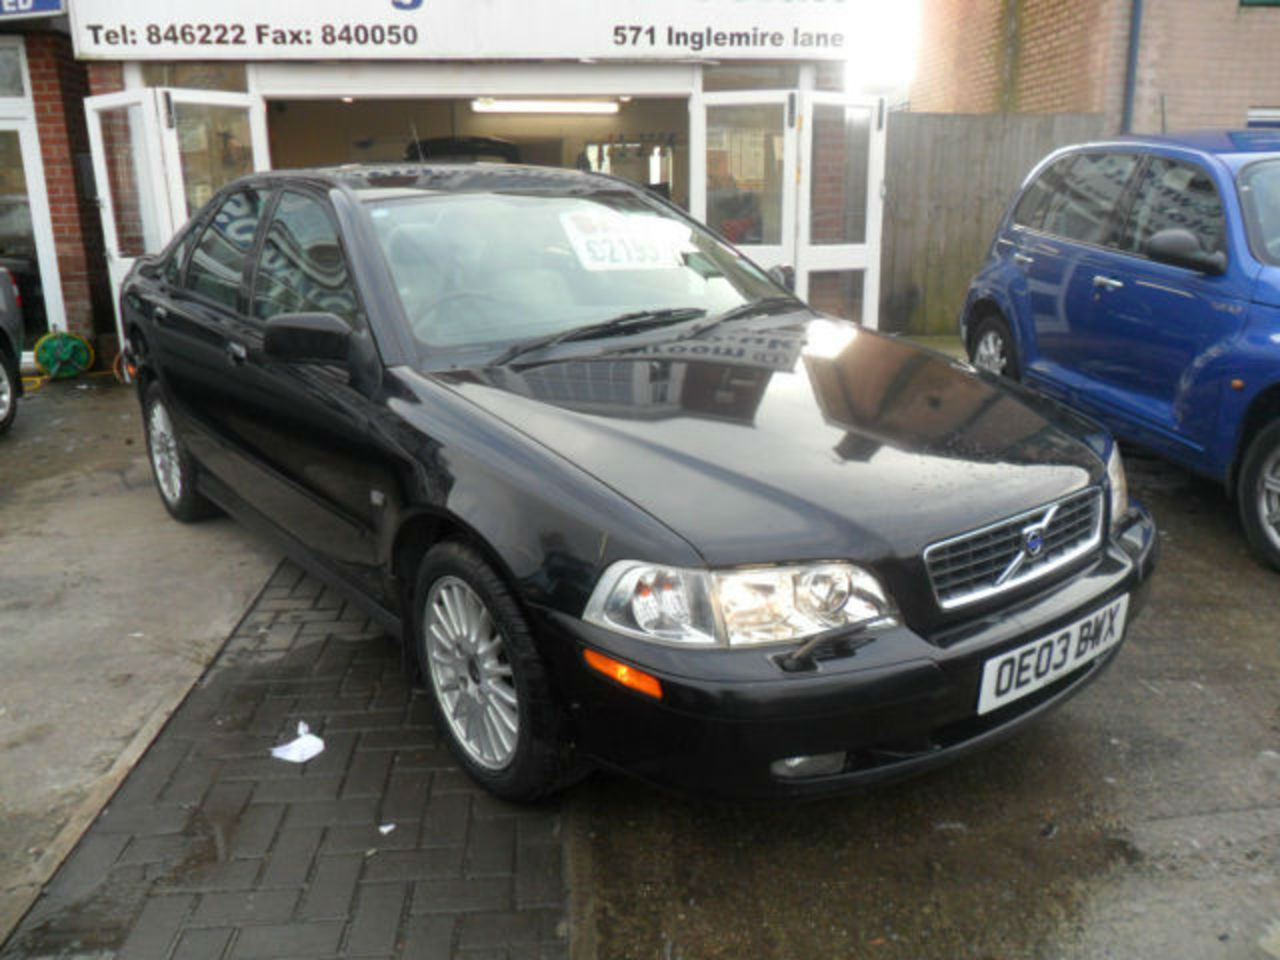 Used Petrol Volvo S40 cars for sale, Second Hand Volvo S40 Petrol â€“ Autoweb